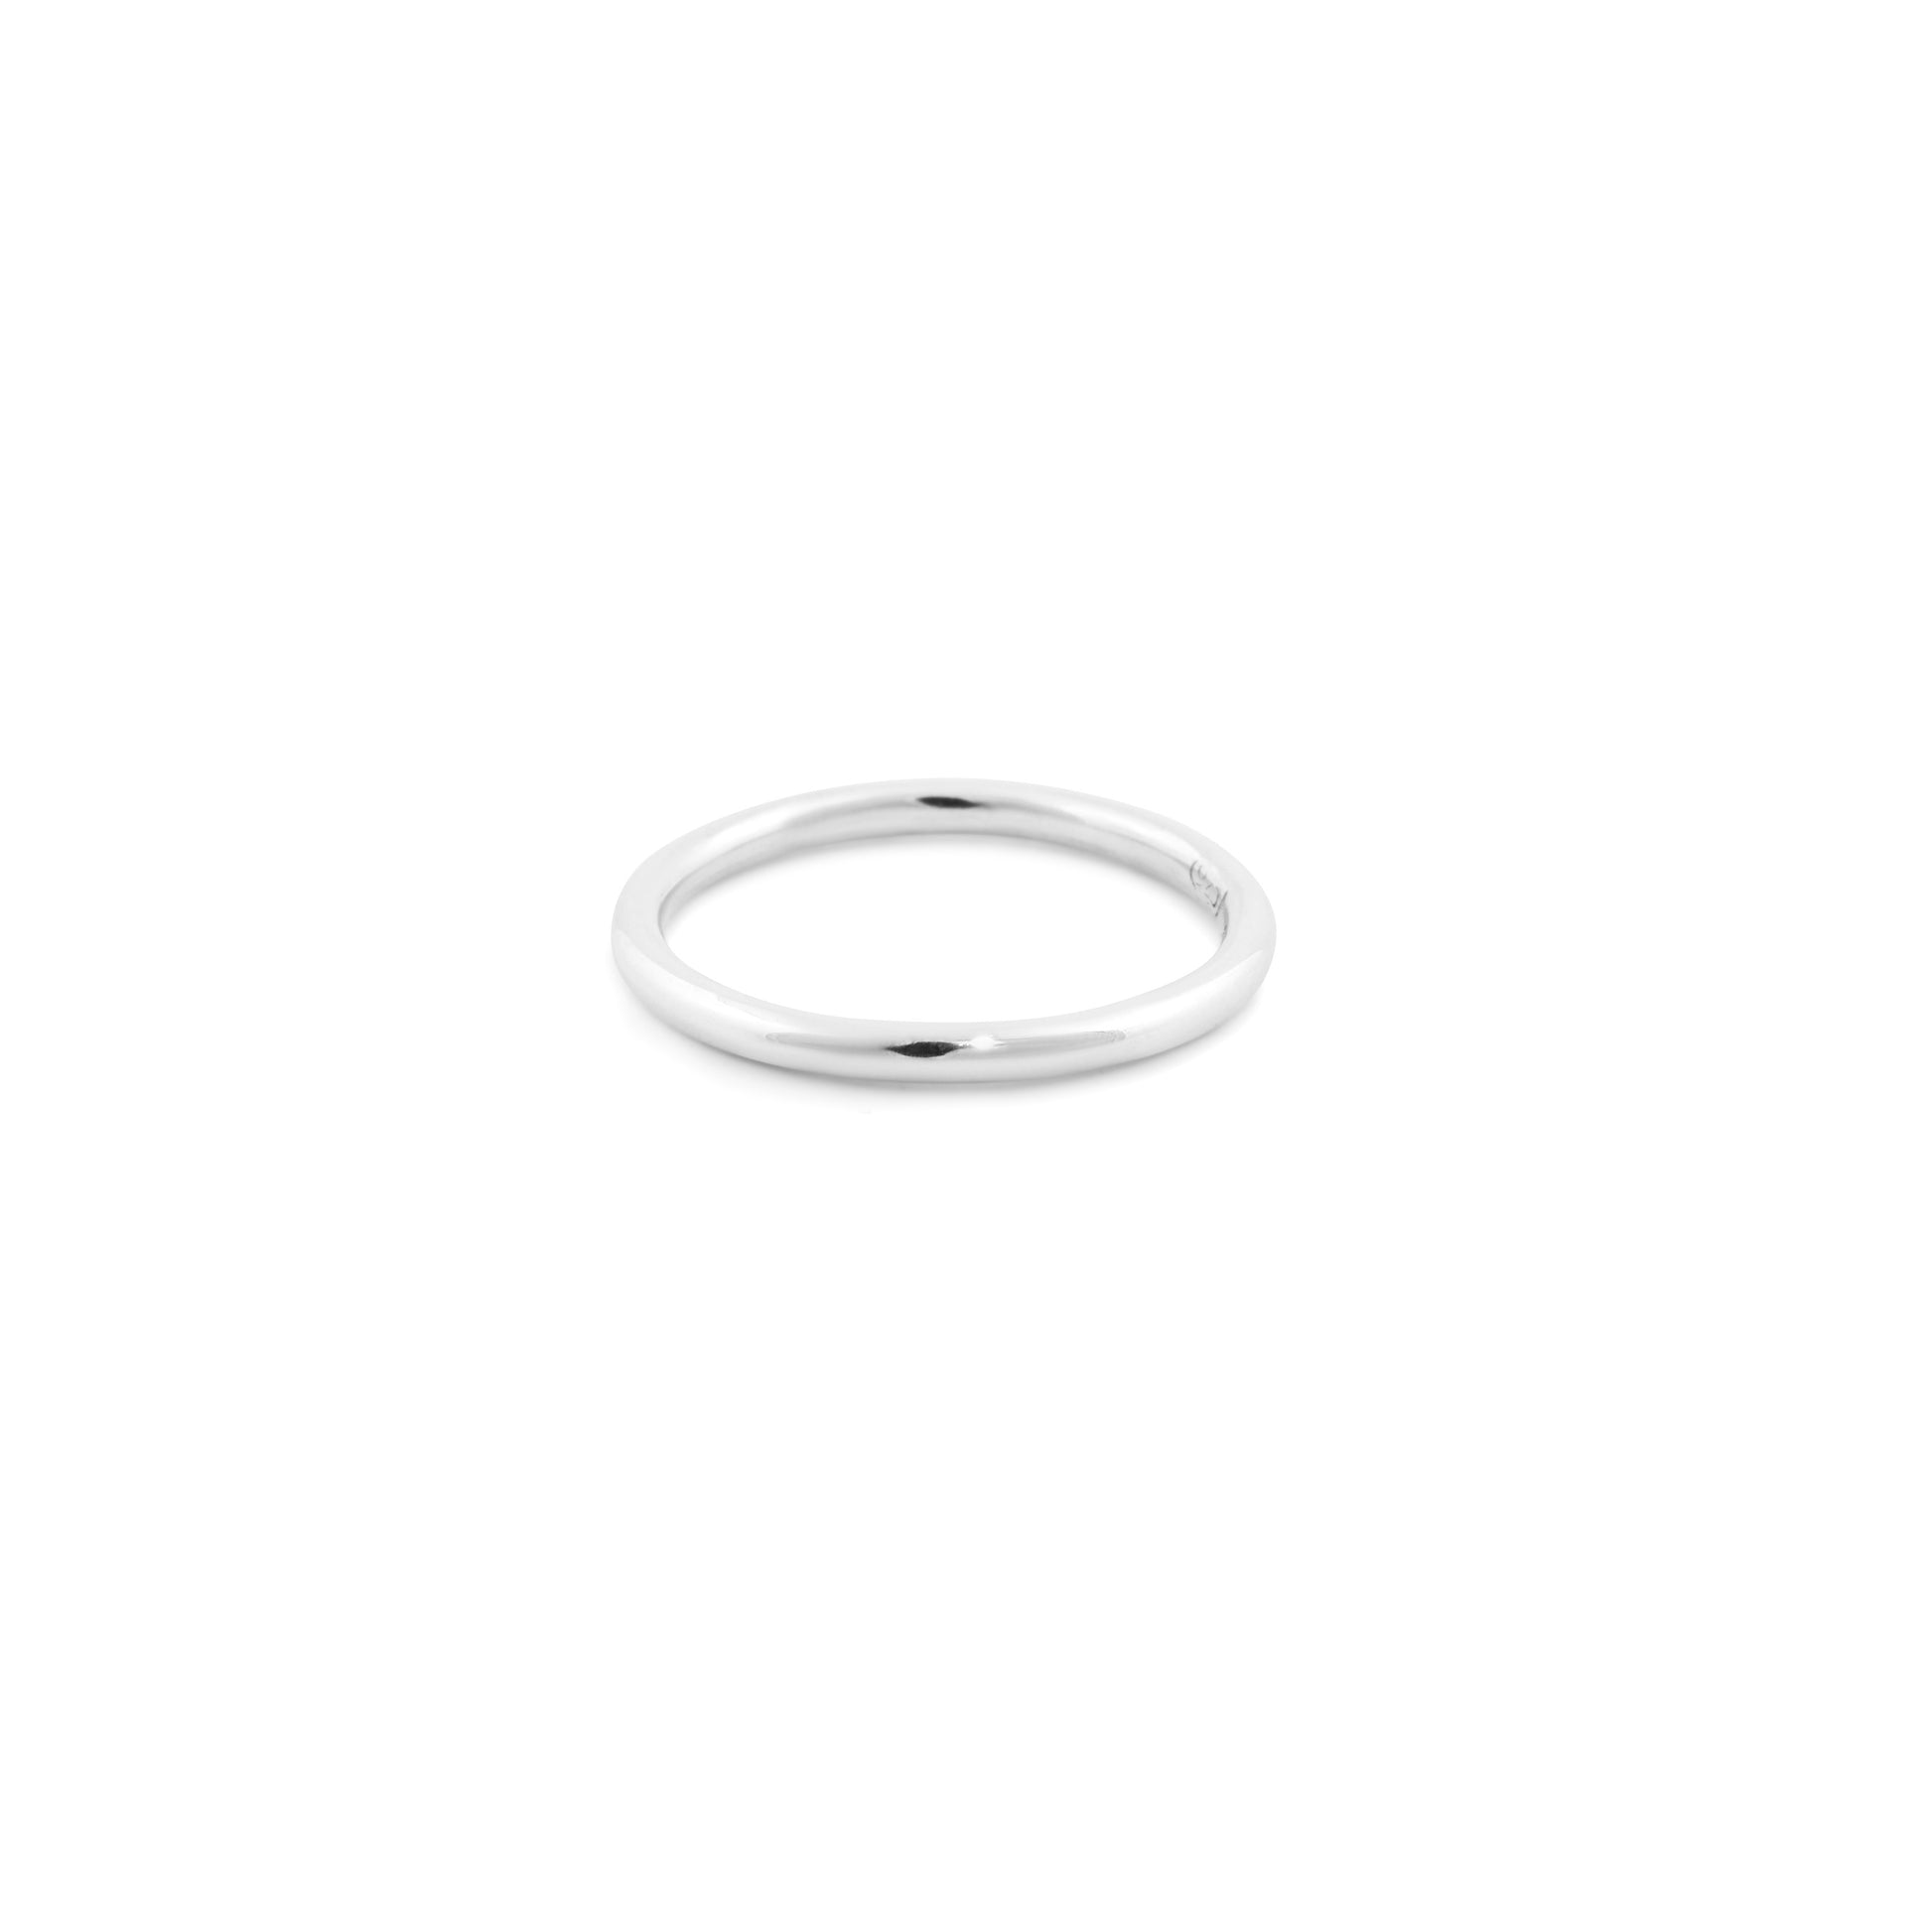 Solid sterling silver classic stacking ring